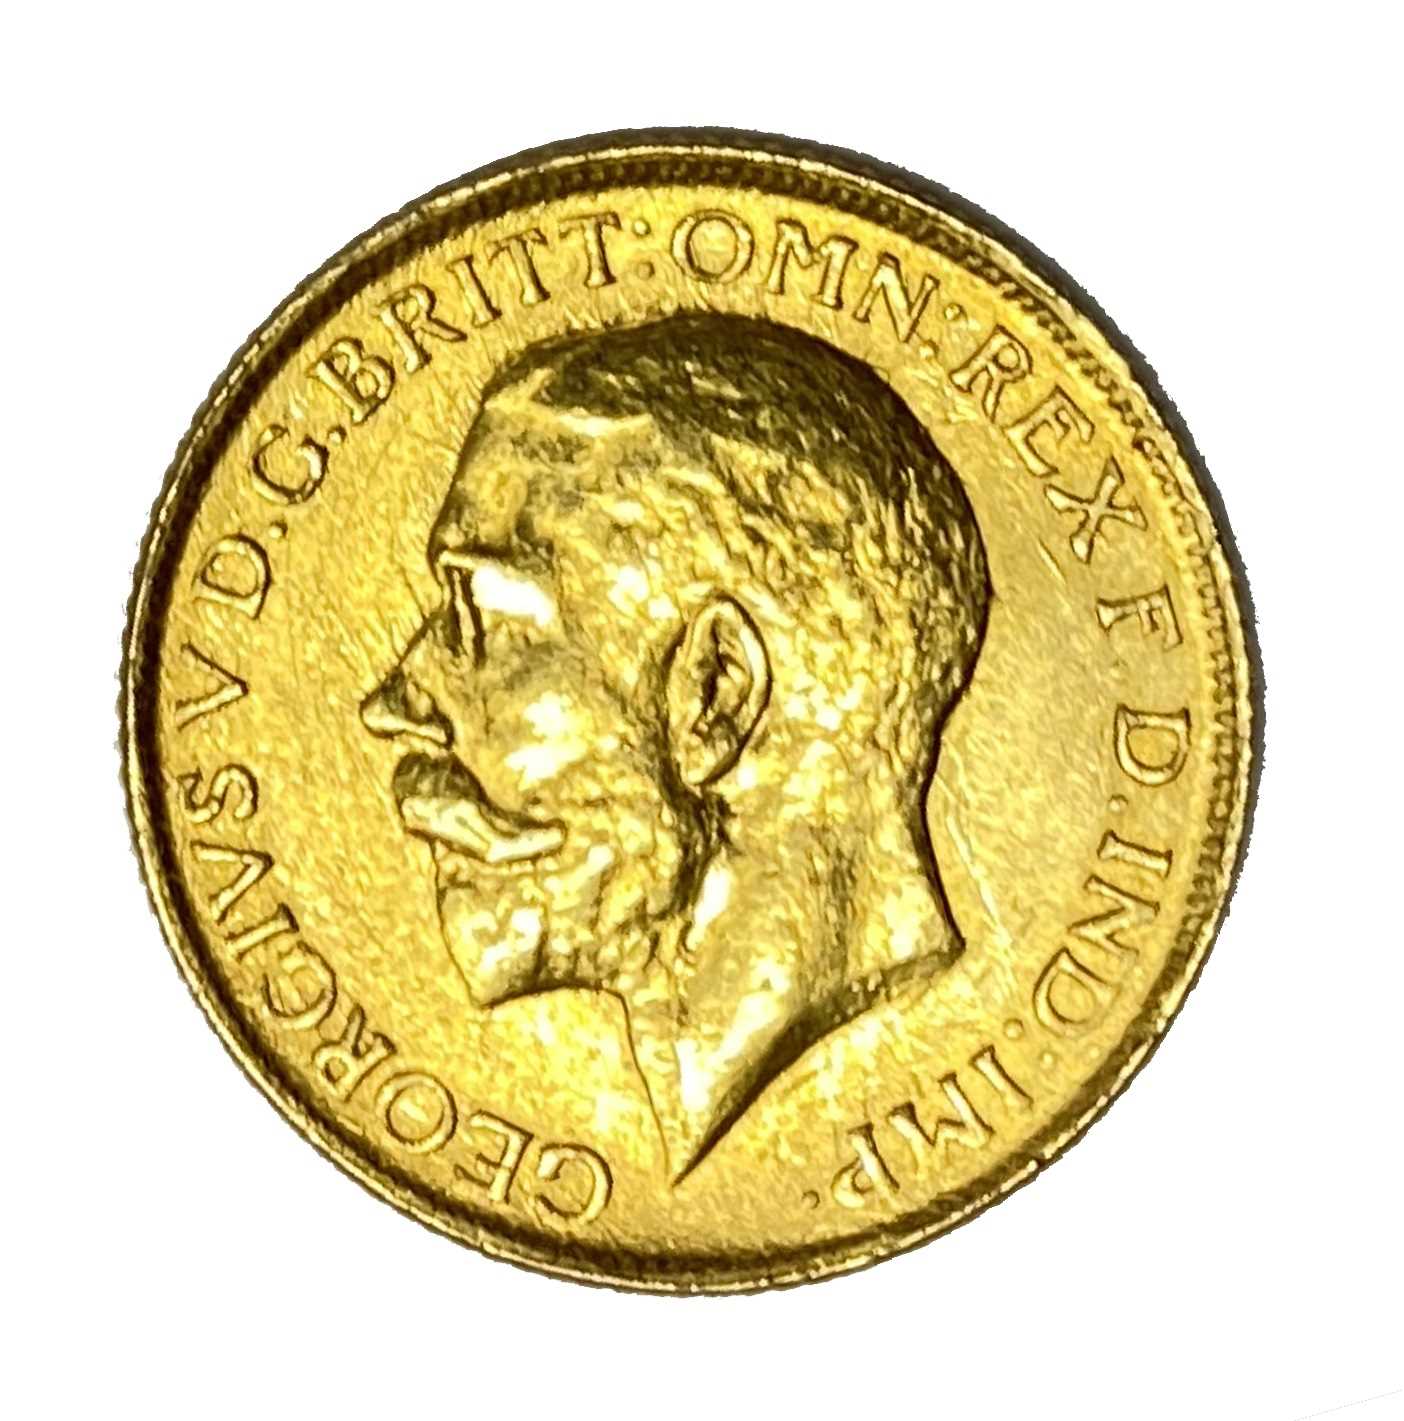 Lot 50 - George V gold Sovereign coin, 1913, Perth mint